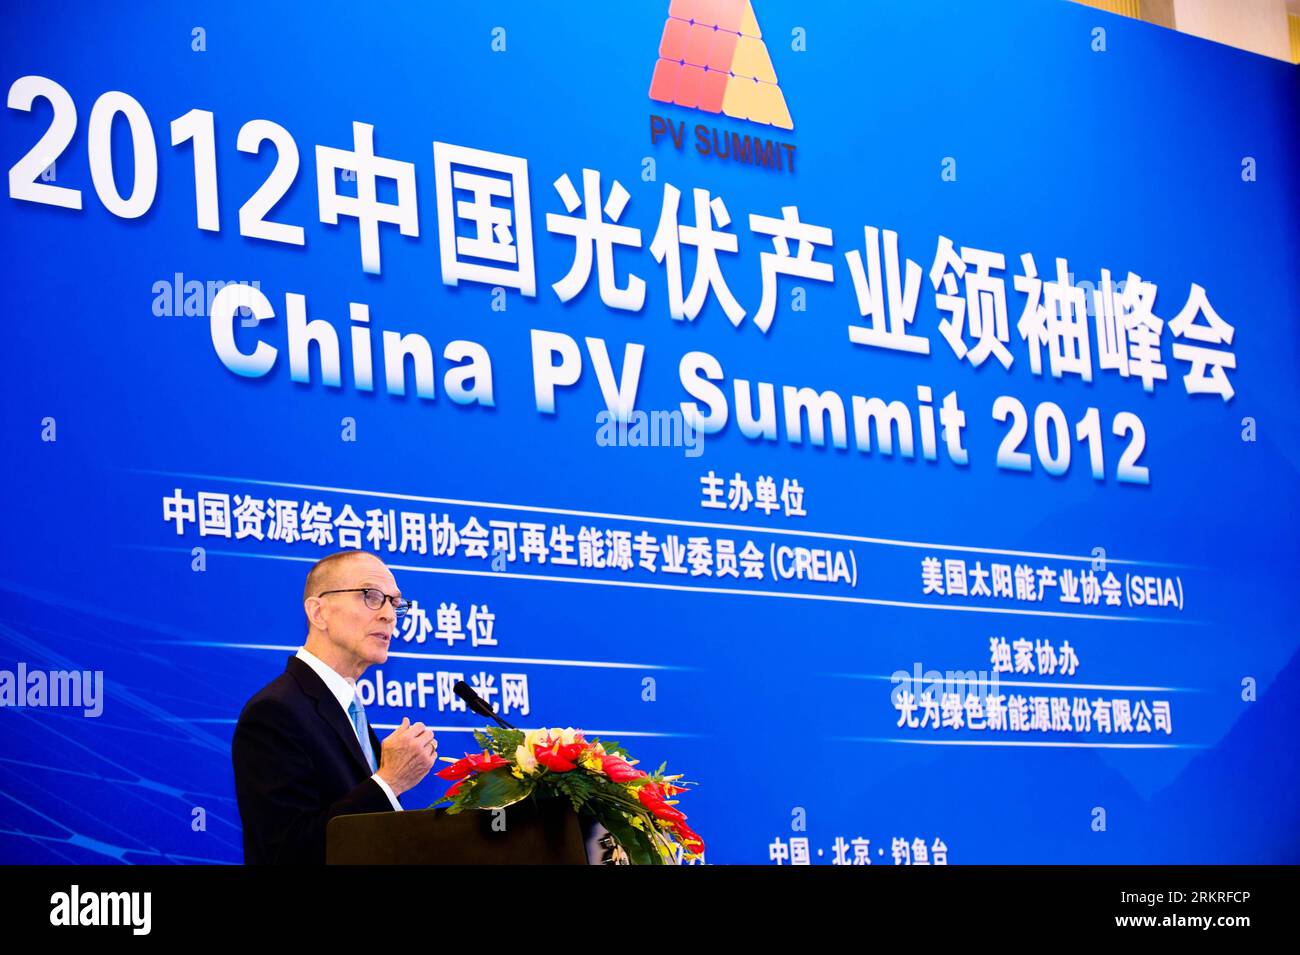 Bildnummer: 58232418  Datum: 12.07.2012  Copyright: imago/Xinhua (120712) -- BEIJING, July 12, 2012 (Xinhua) -- William Zarit, minister-counselor of commercial affairs of the U.S. Embassy to China, addresses the China PV Summit 2012 in Beijing, capital of China, July 12, 2012. The China PV Summit 2012, co-sponsored by Chinese Renewable Energy Industries Association (CREIA) and Solar Energy Industries Association (SEIA), was held here on Thursday to further explore new opportunities of the photovoltaic industry and to address new challenges the PV industry is now facing. (Xinhua/Liu Jinhai) (lm Stock Photo